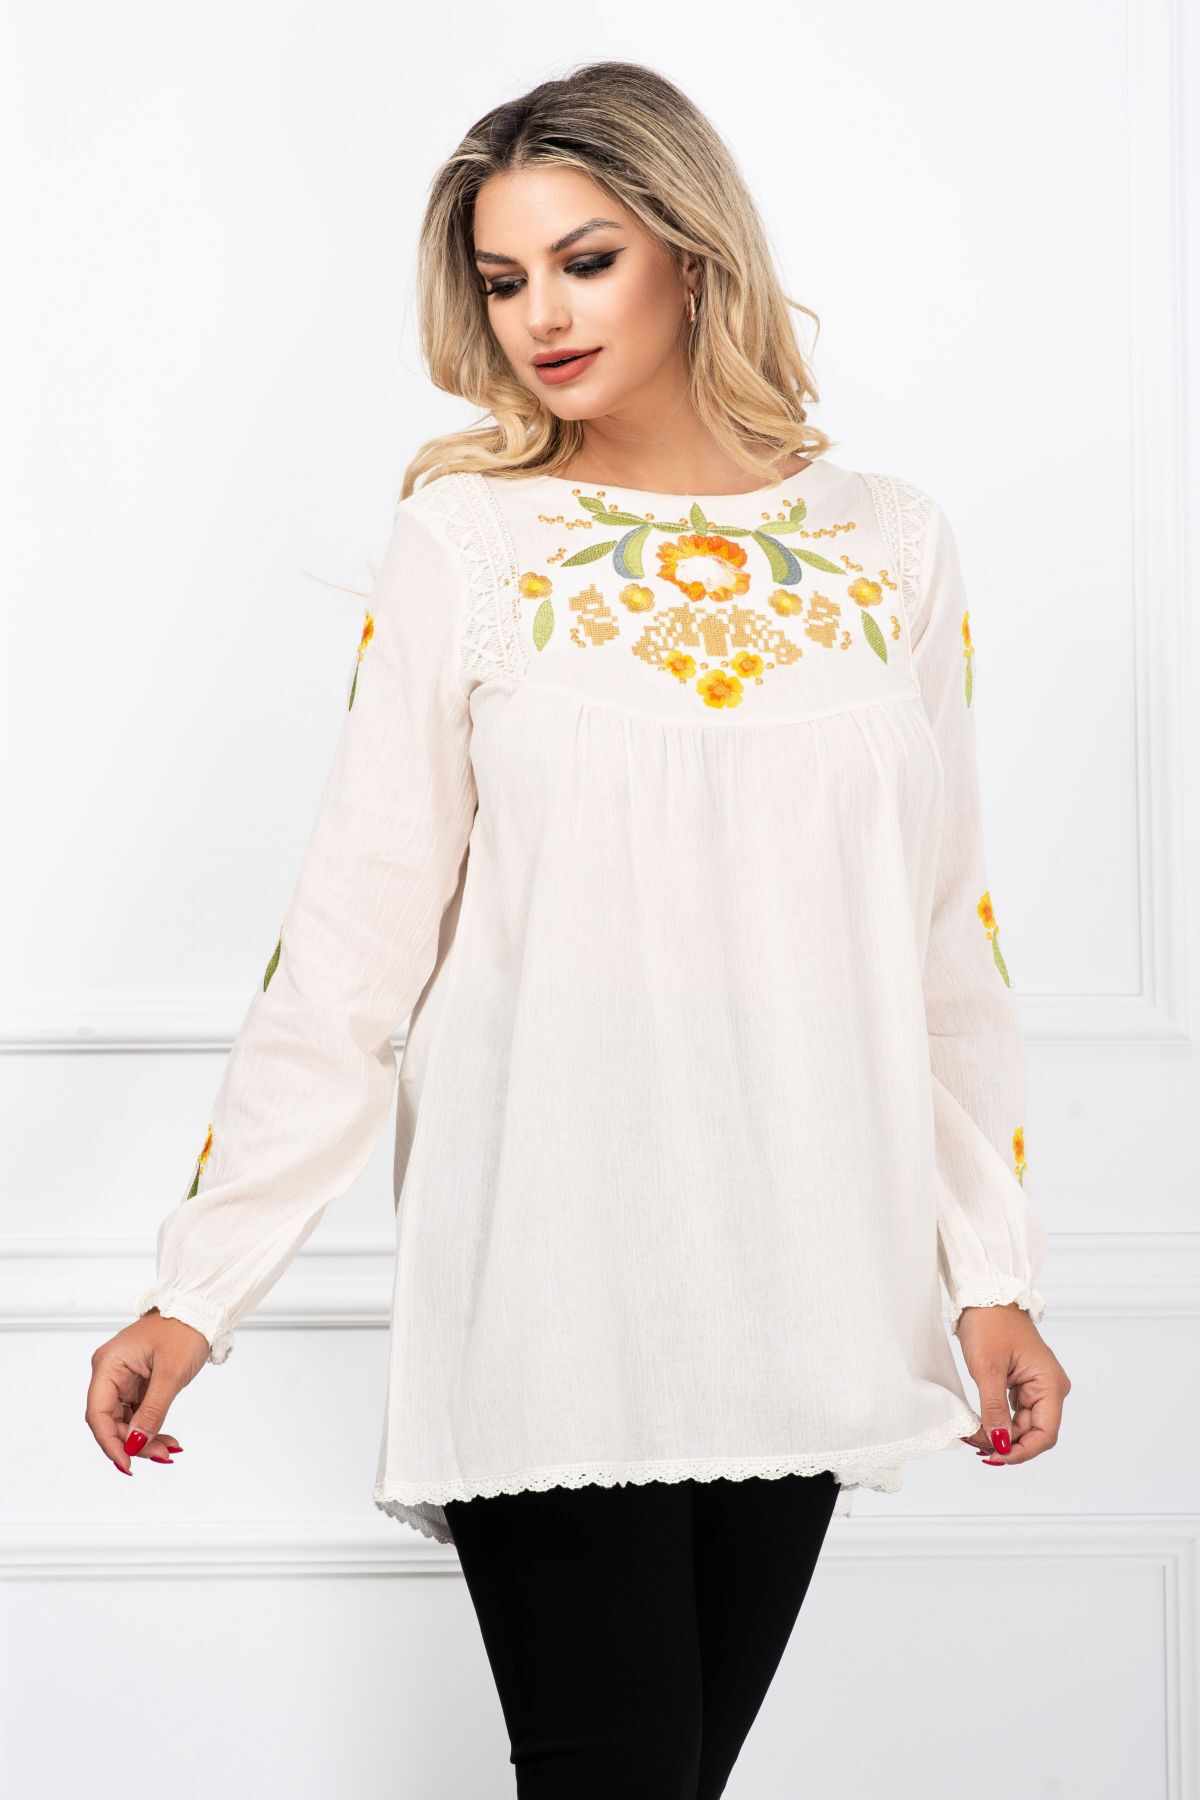 Bluza tip ie lunga traditionala ivoire cu broderie florala By InPuff